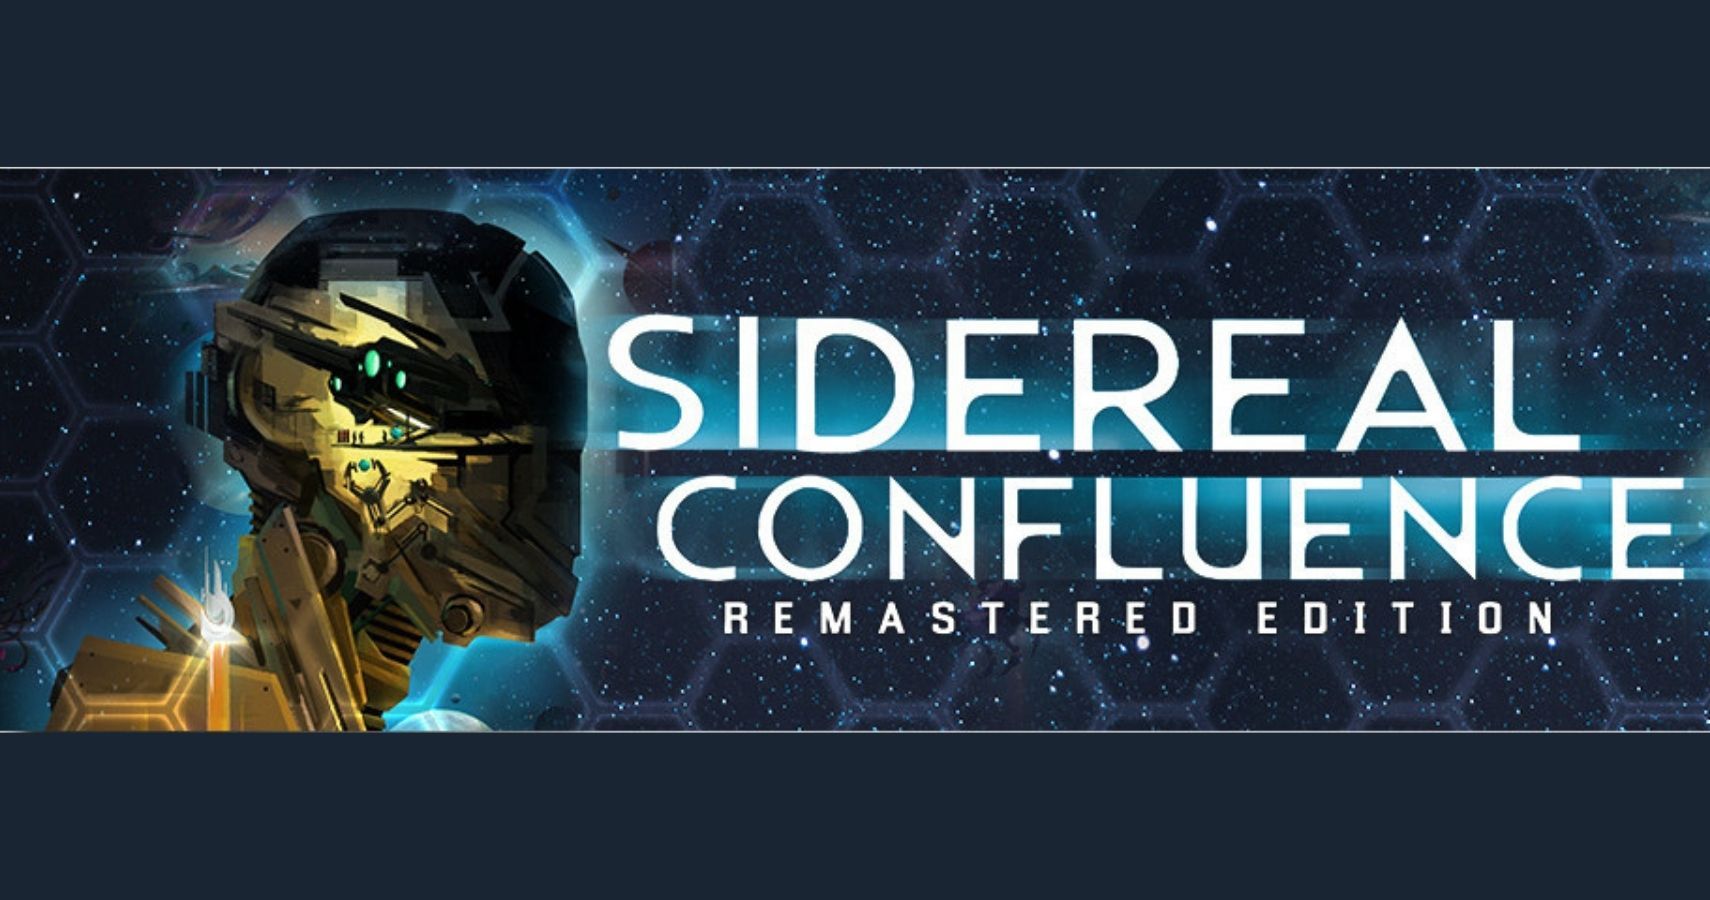 Sidereal Confluence Remastered Edition Announcement feature image